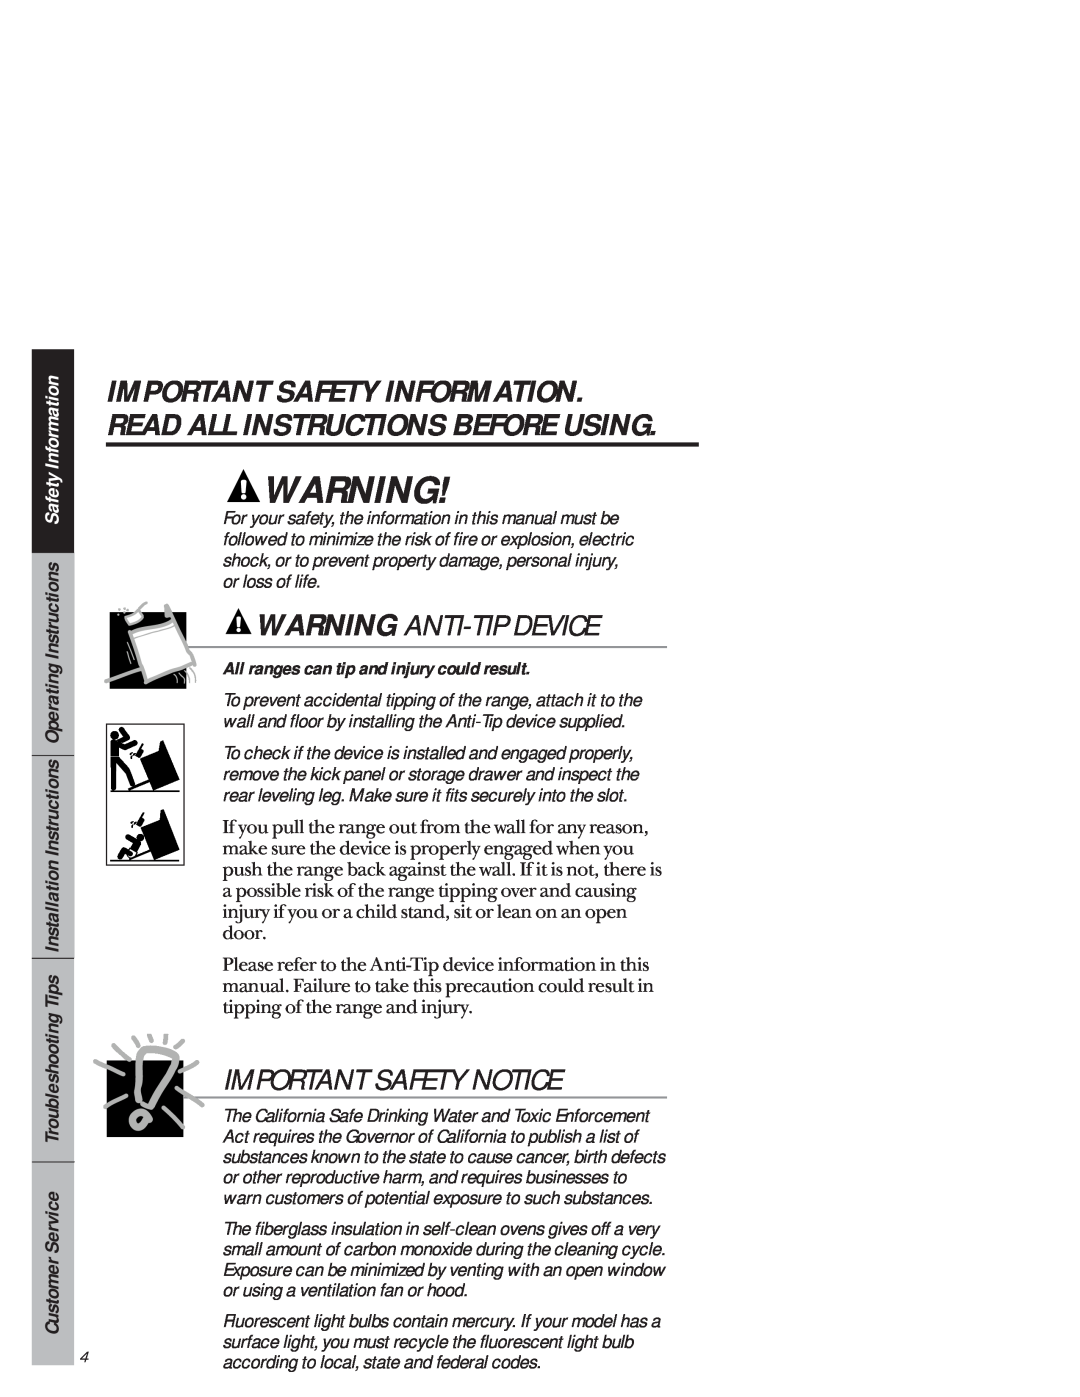 GE JB940 owner manual Warning Anti-Tip Device, Important Safety Notice, All ranges can tip and injury could result 